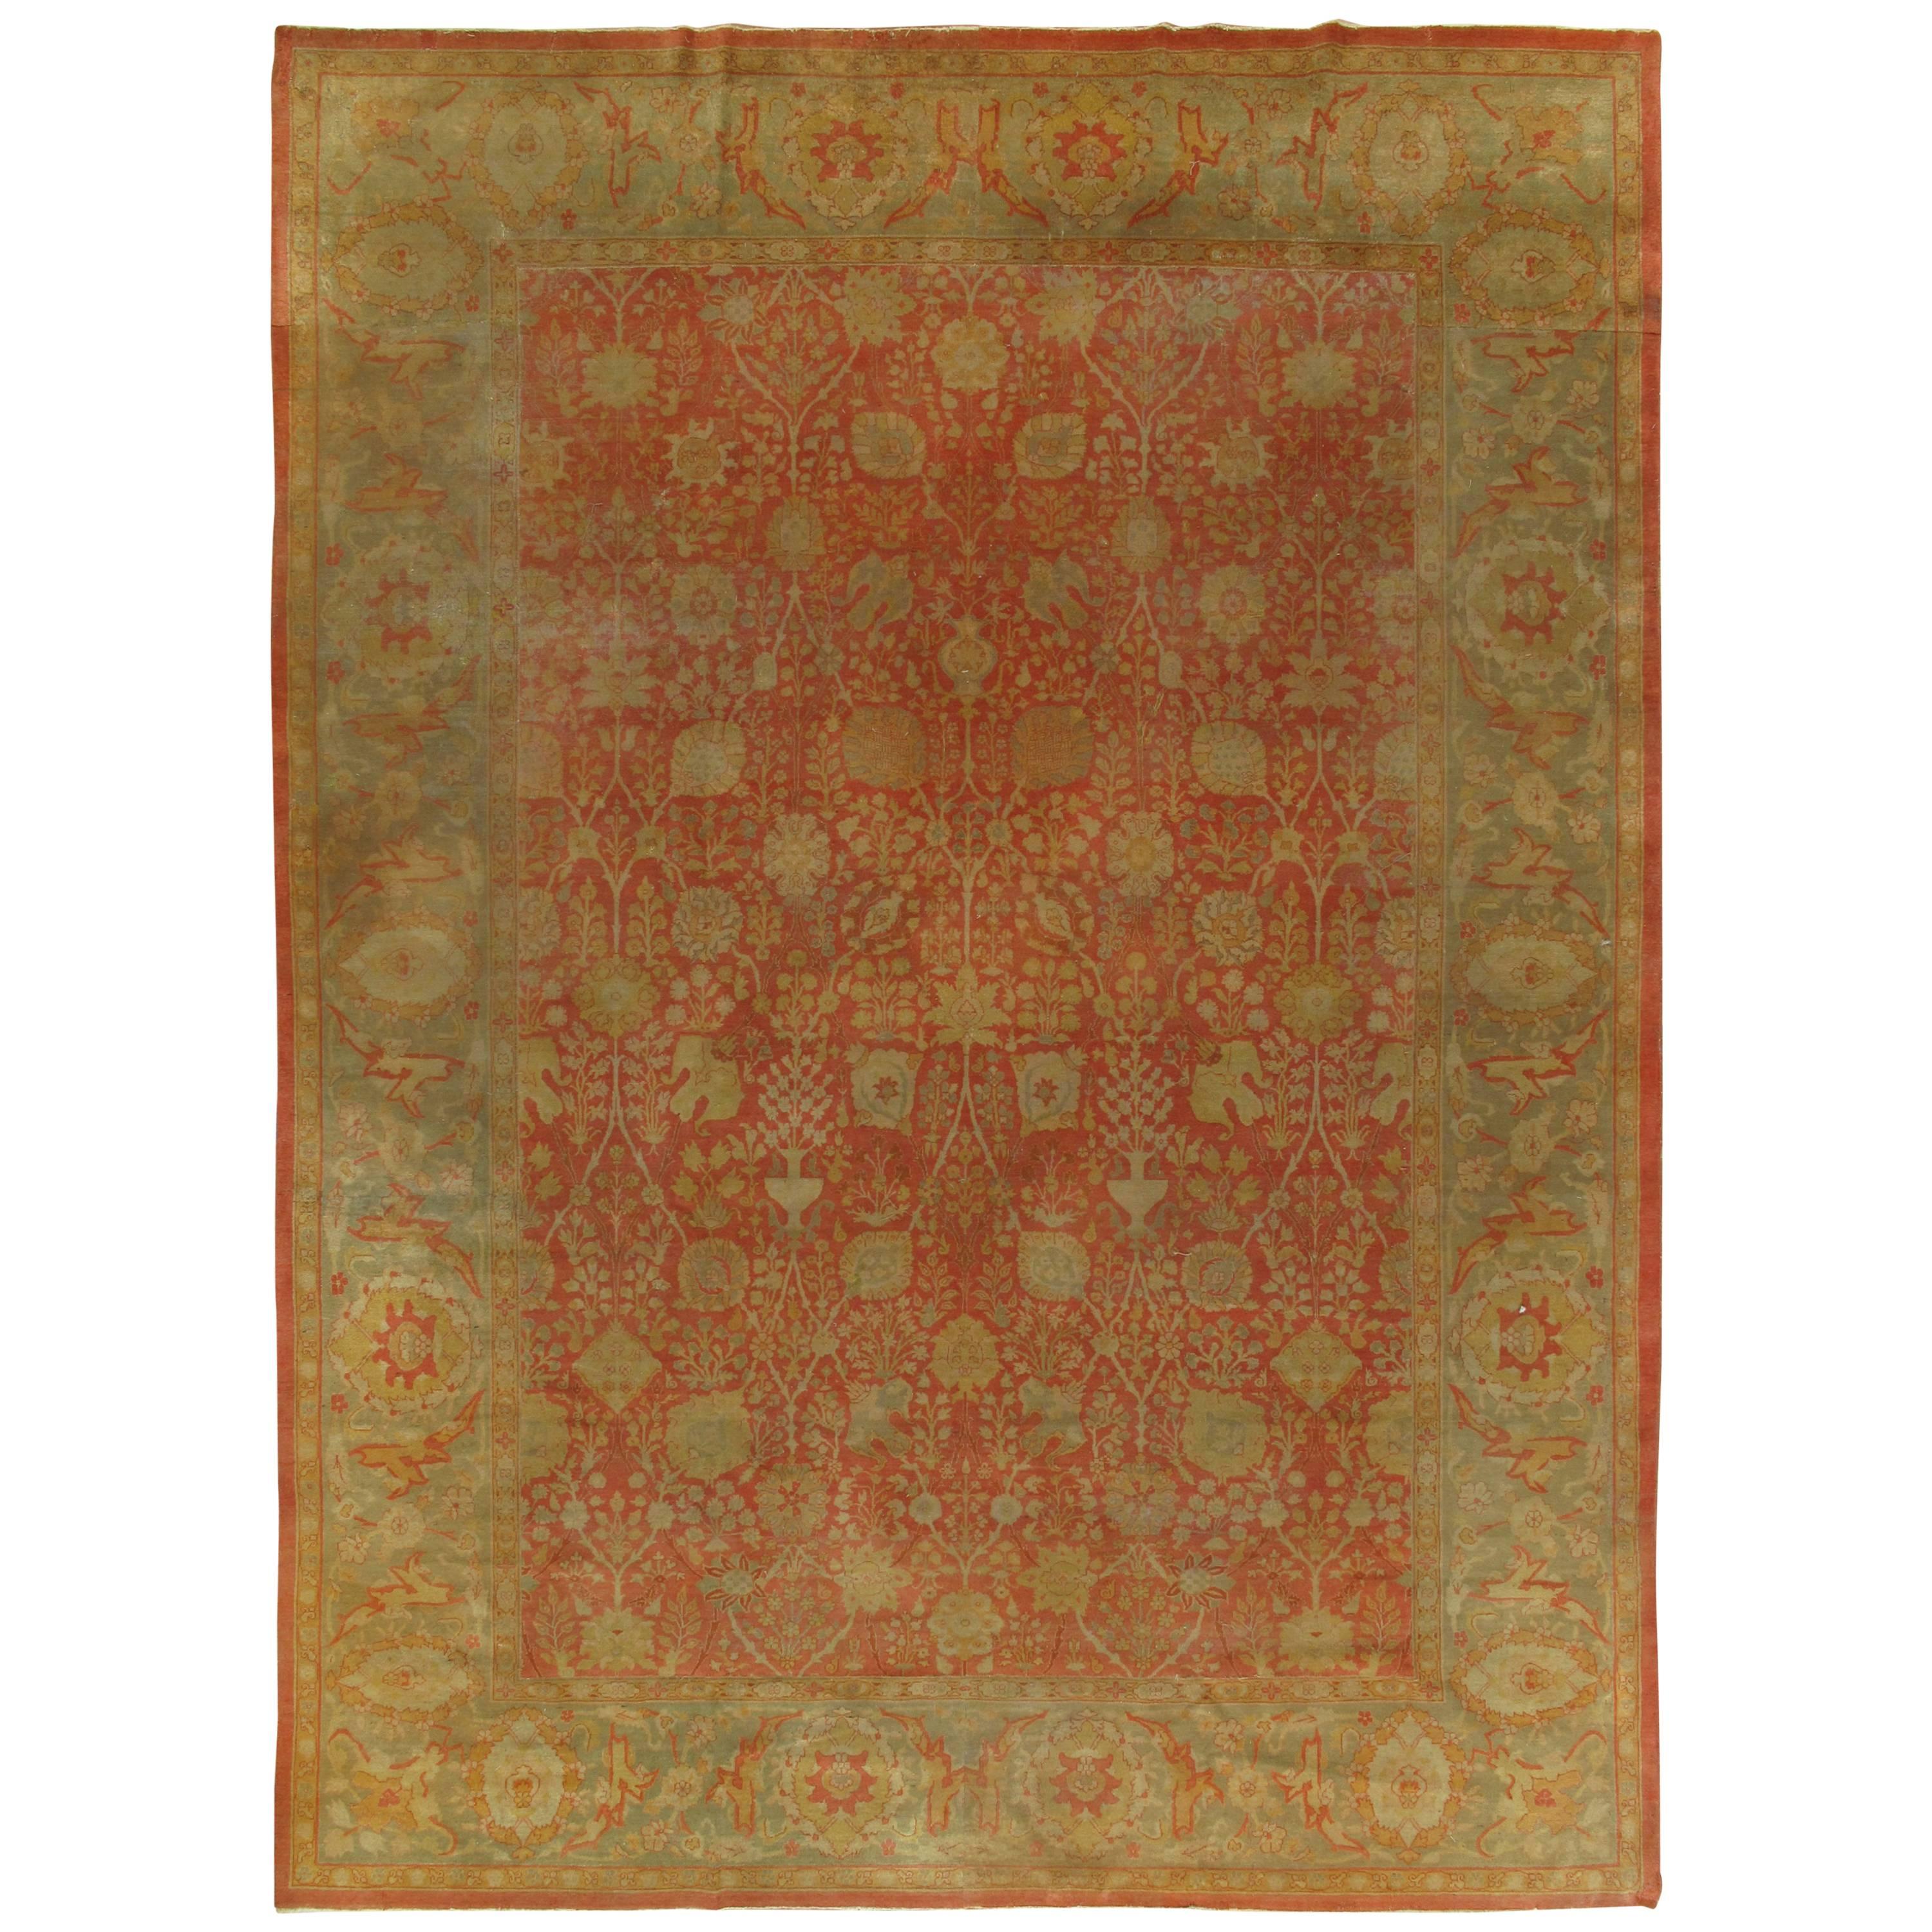 Extremely Fine Antique Sivas Handmade Carpet, Red and Green, All-over Design